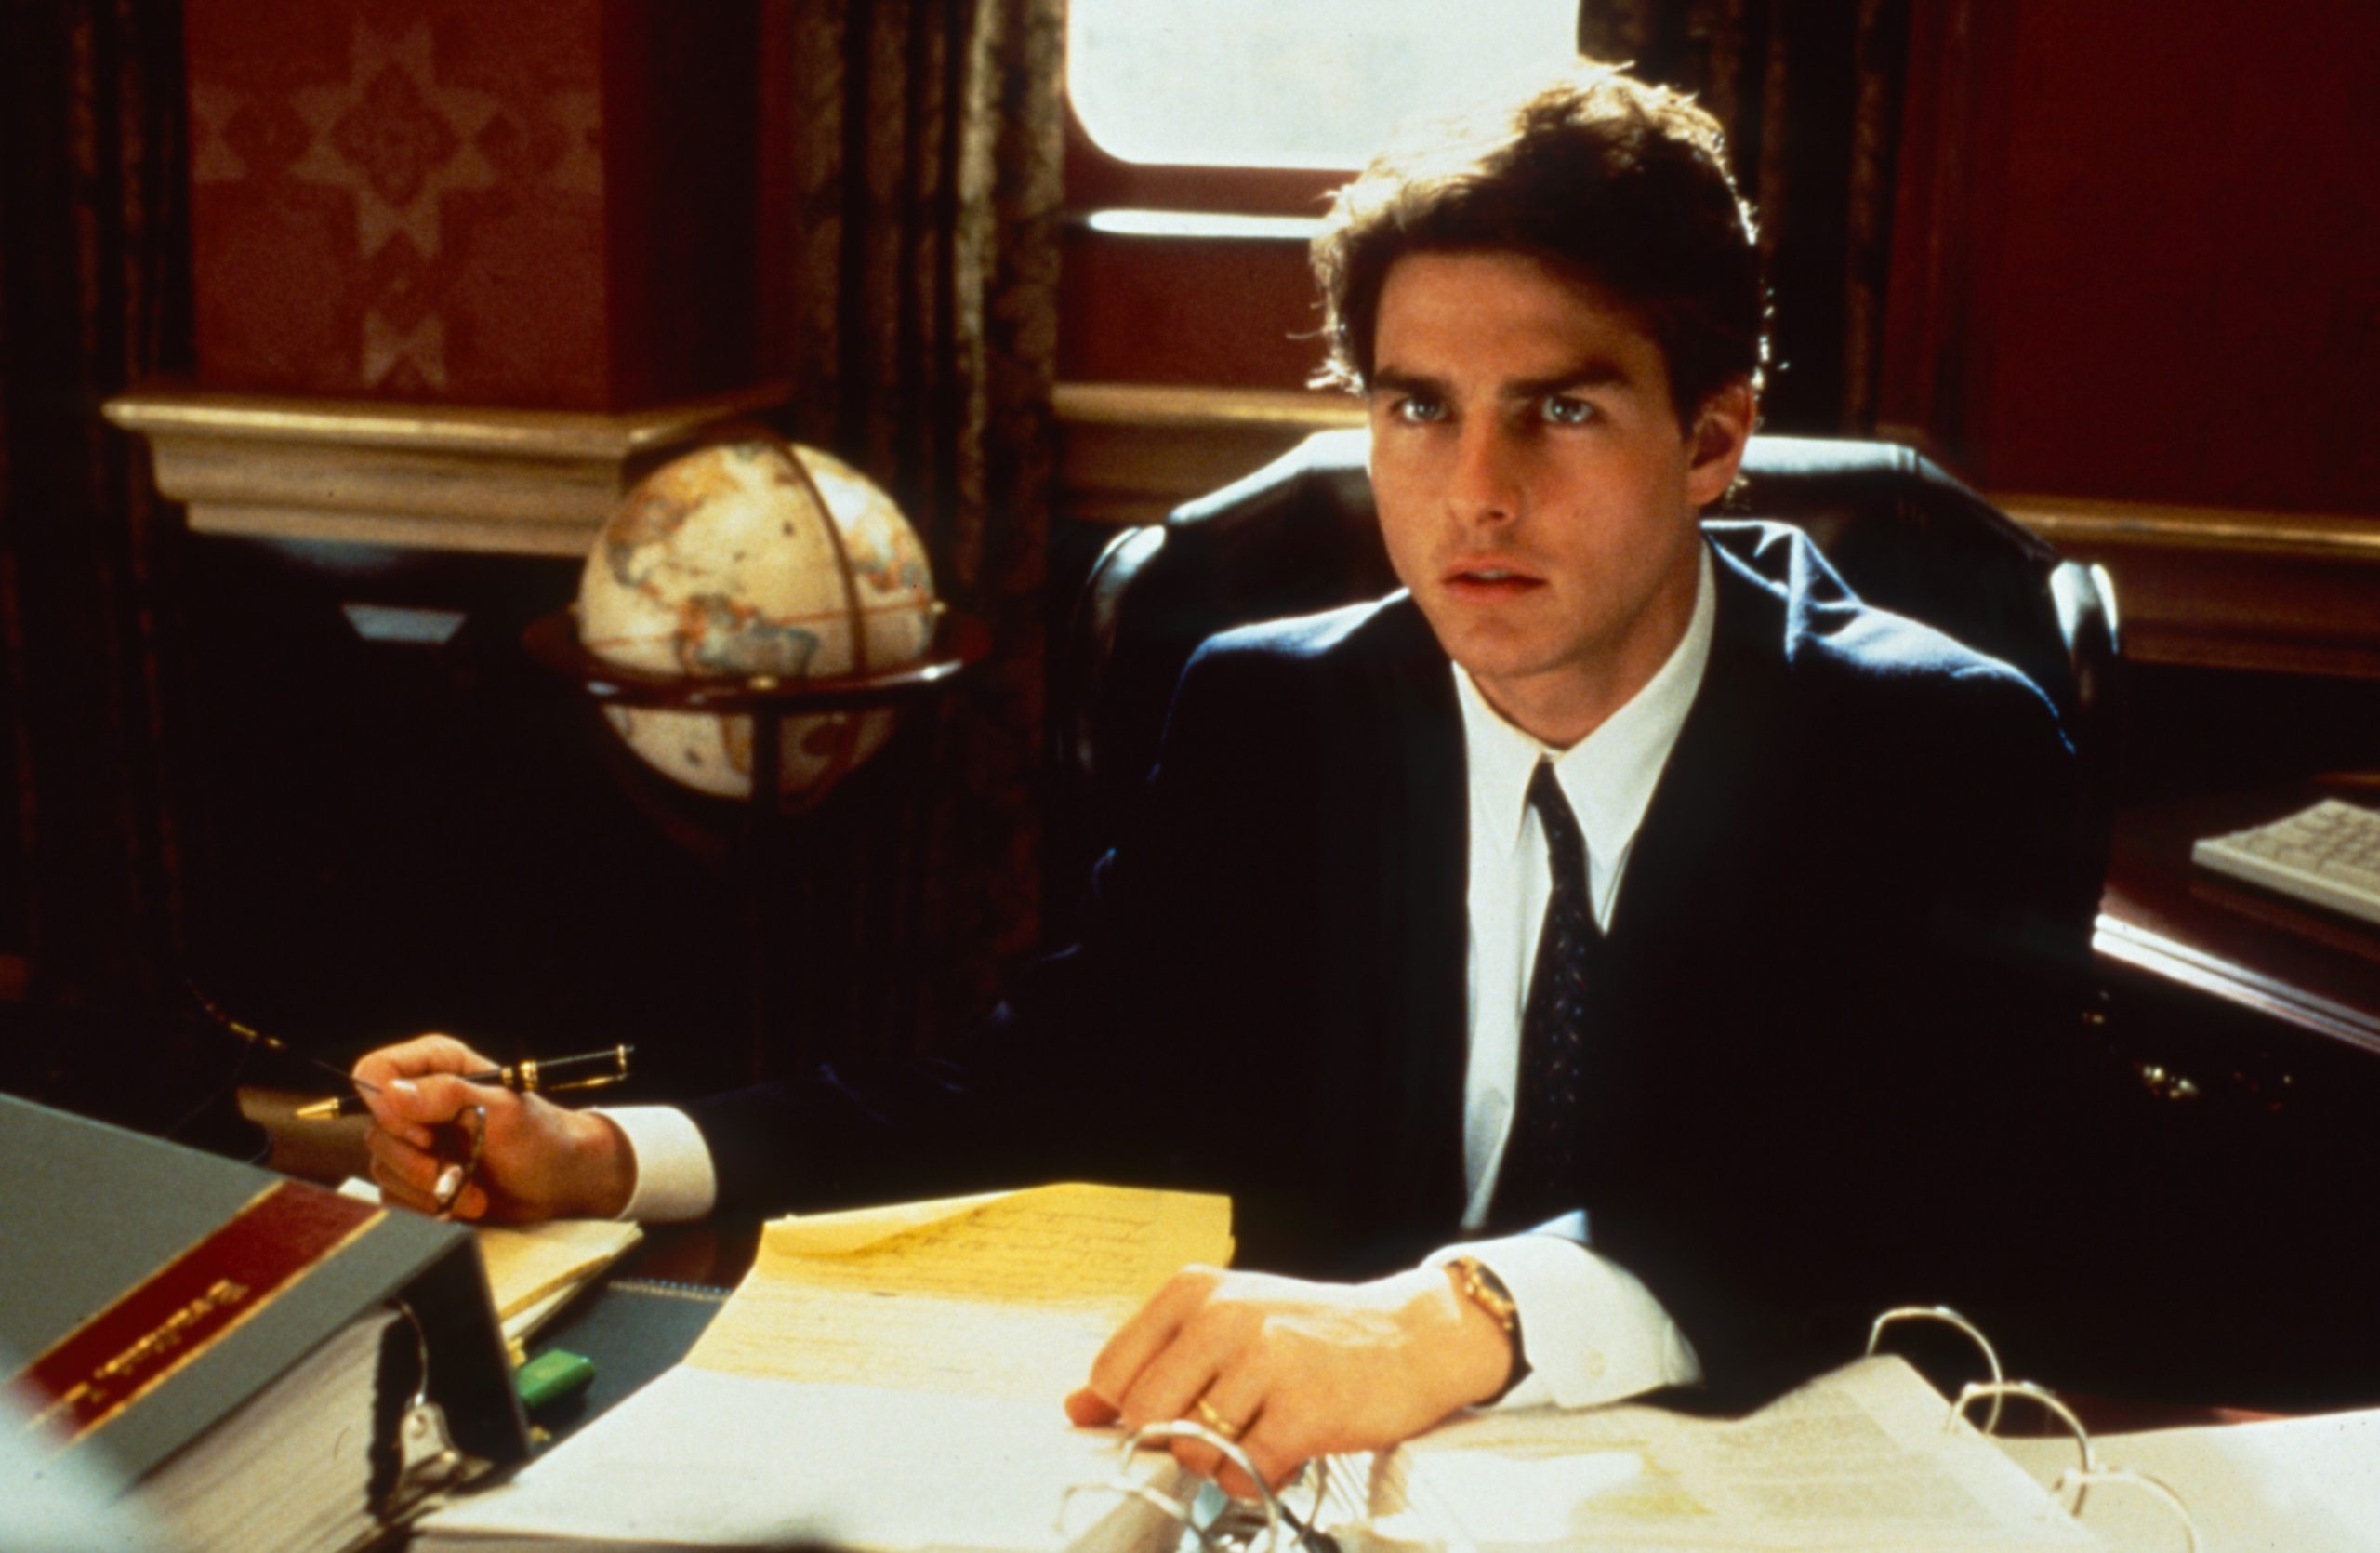 THE FIRM, Tom Cruise, 1993. © Paramount Pictures / courtesy Everett Collection